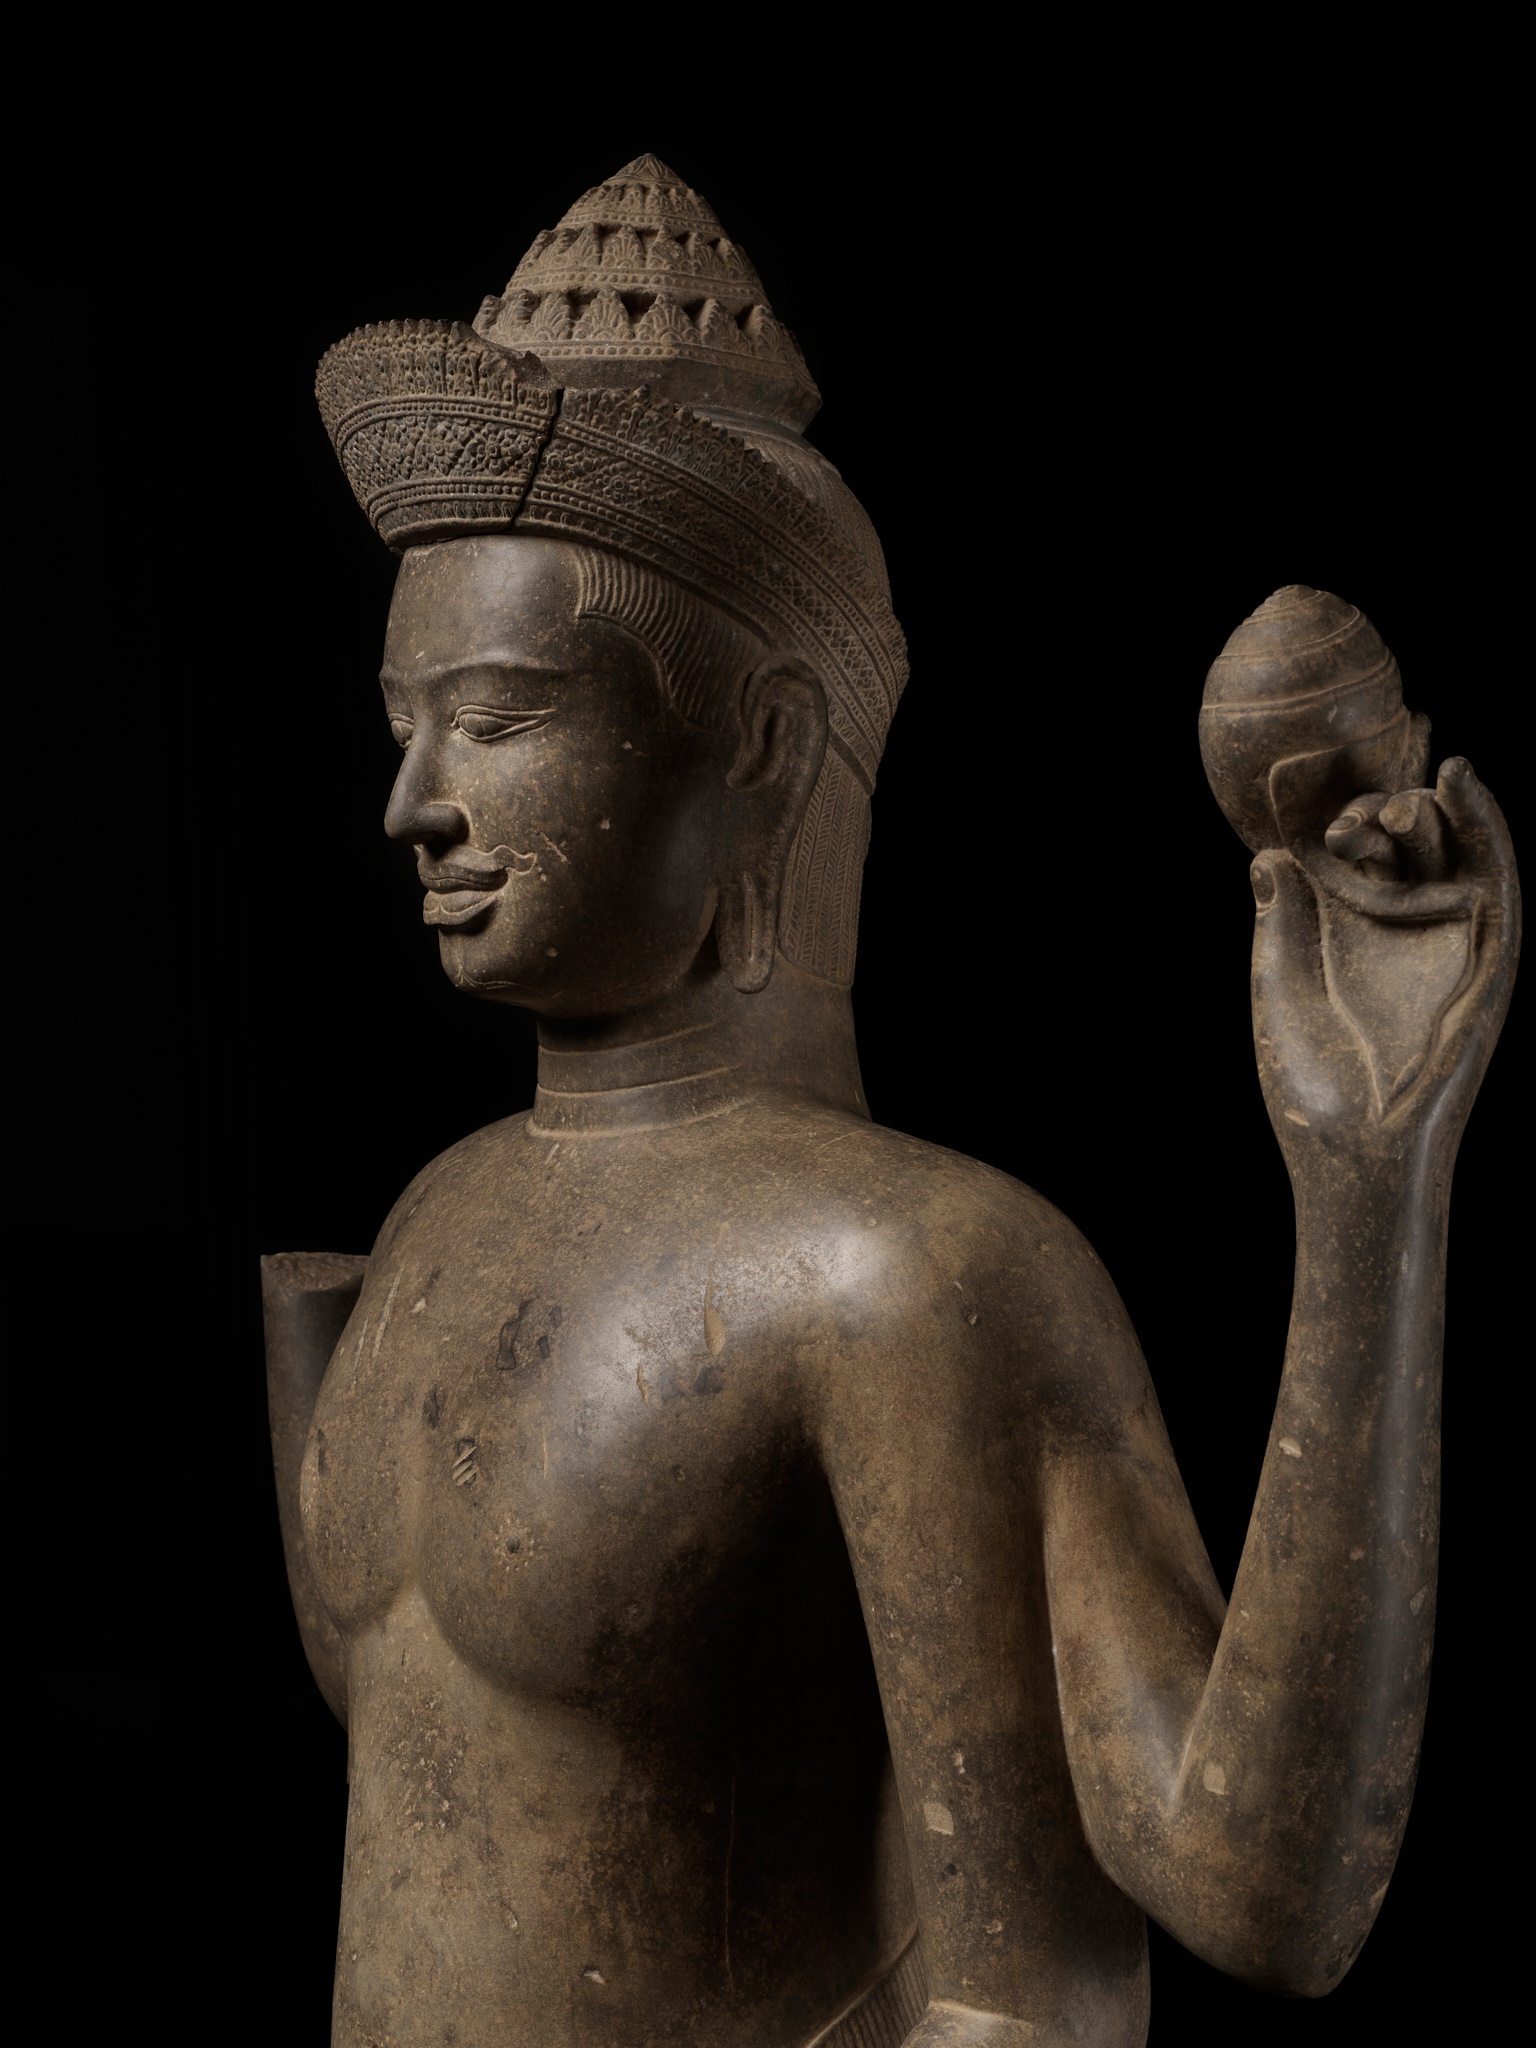 AN EXTREMELY RARE AND MONUMENTAL SANDSTONE STATUE OF VISHNU, ANGKOR PERIOD - Image 11 of 17